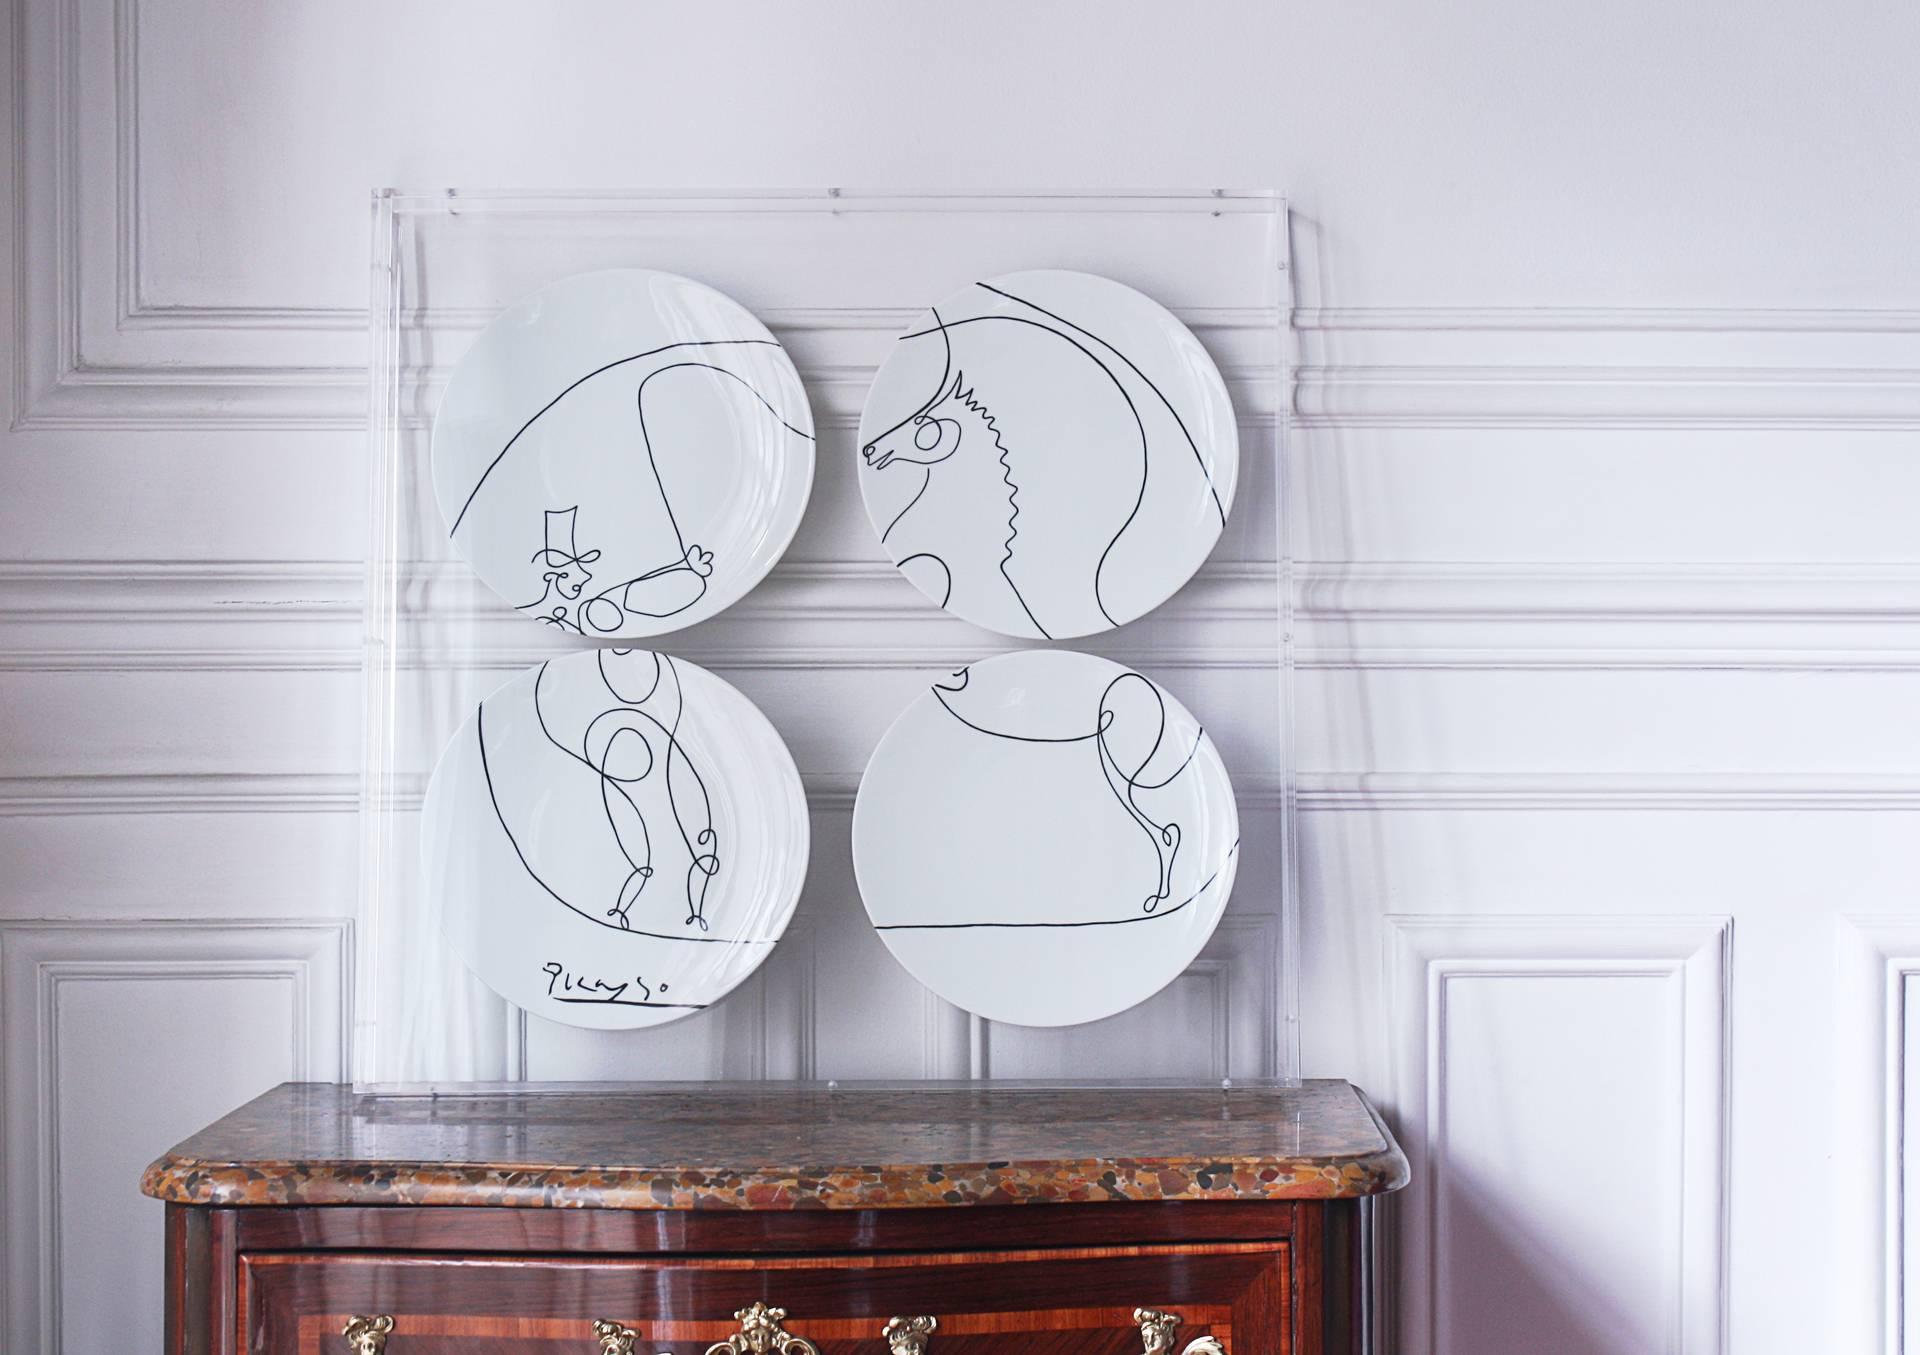 Dinner plates (The Horse Trainer)
boxed set of four
porcelain from Limoges
Measure: 10.6